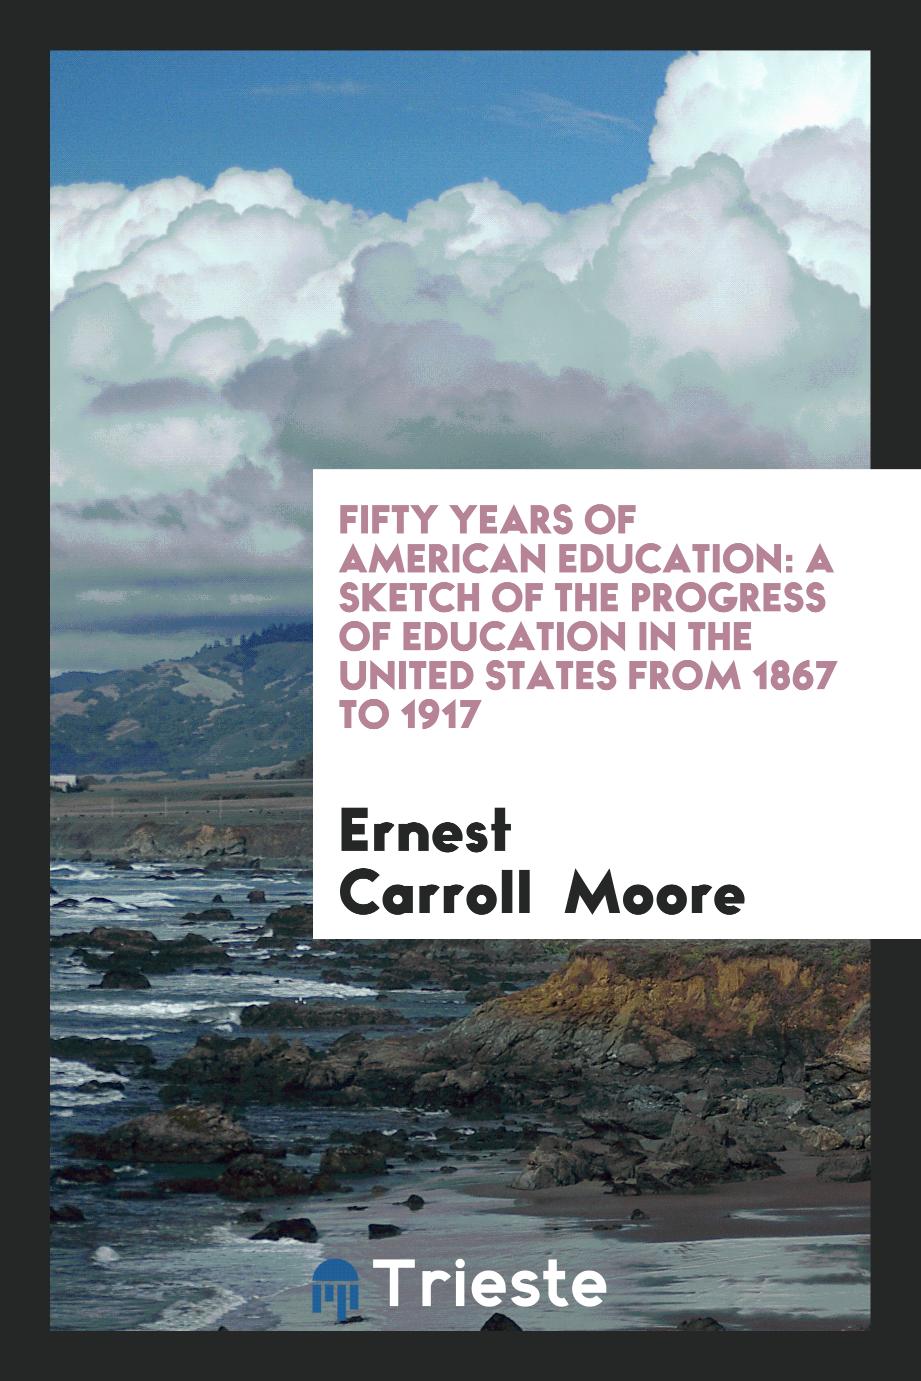 Fifty Years of American Education: A Sketch of the Progress of Education in the United States from 1867 to 1917